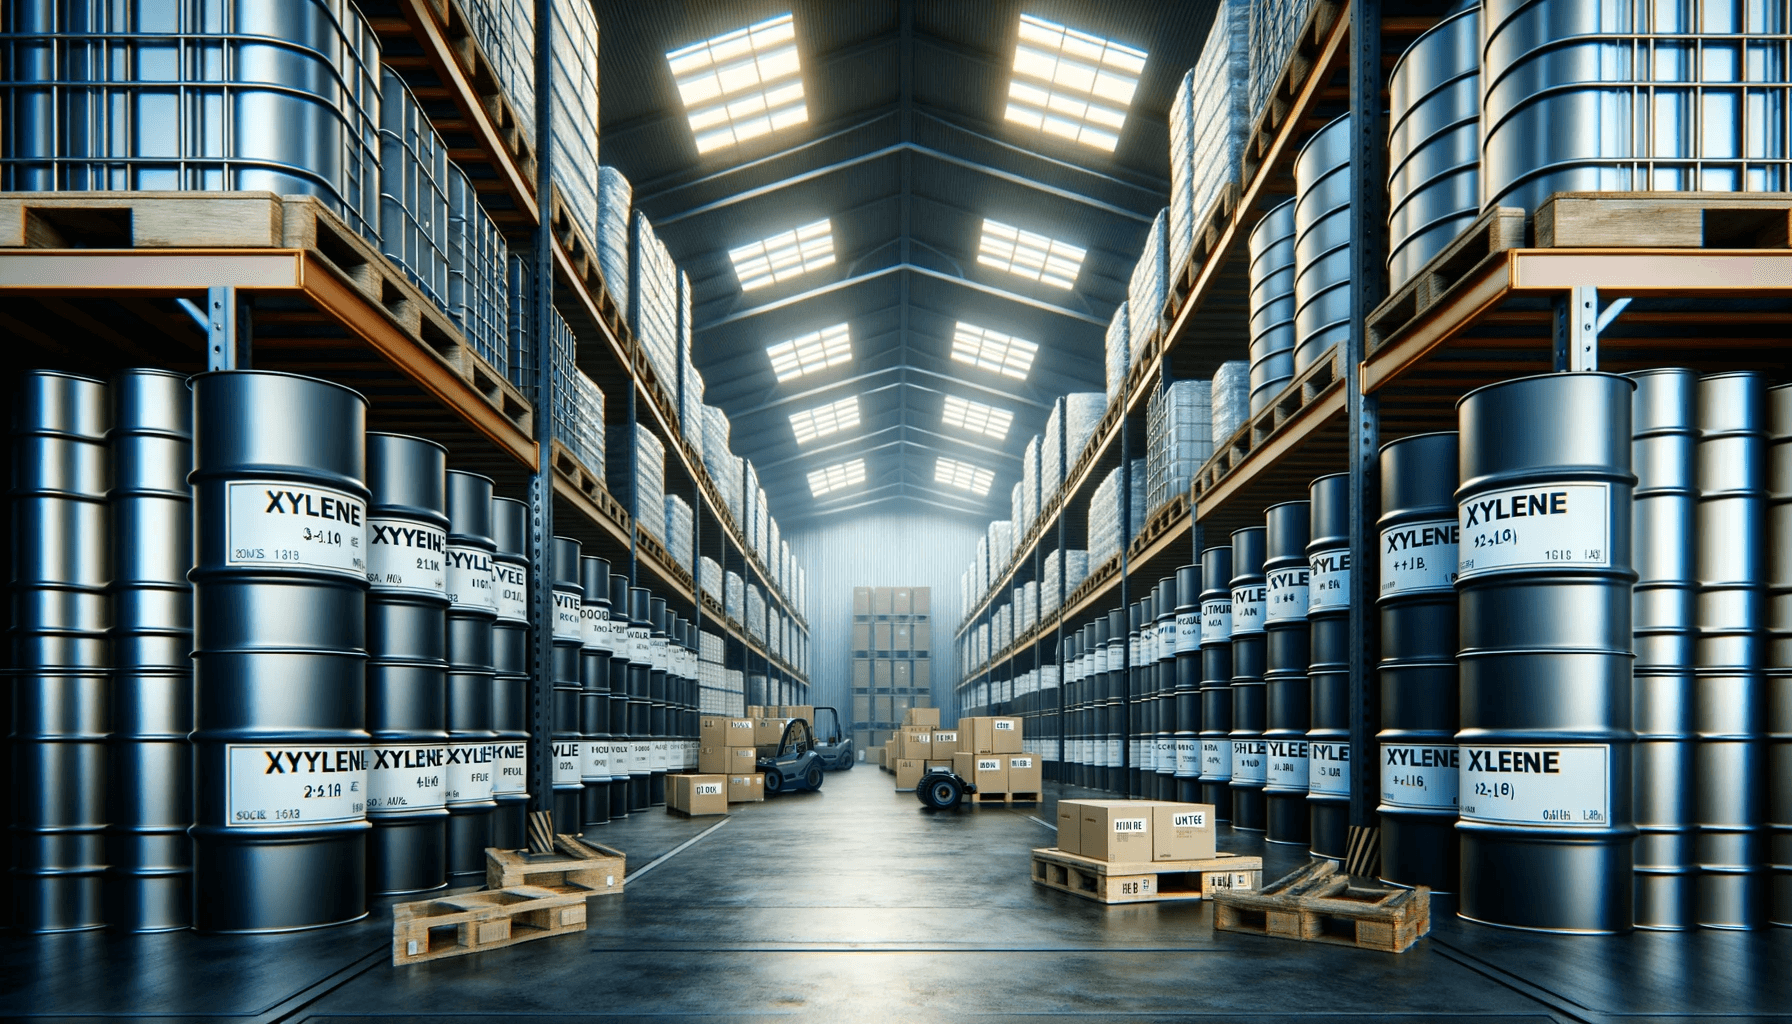 xylene in its natural form stored in an industrial warehouse environment. The image should show containers or barrels of خرید زایلن